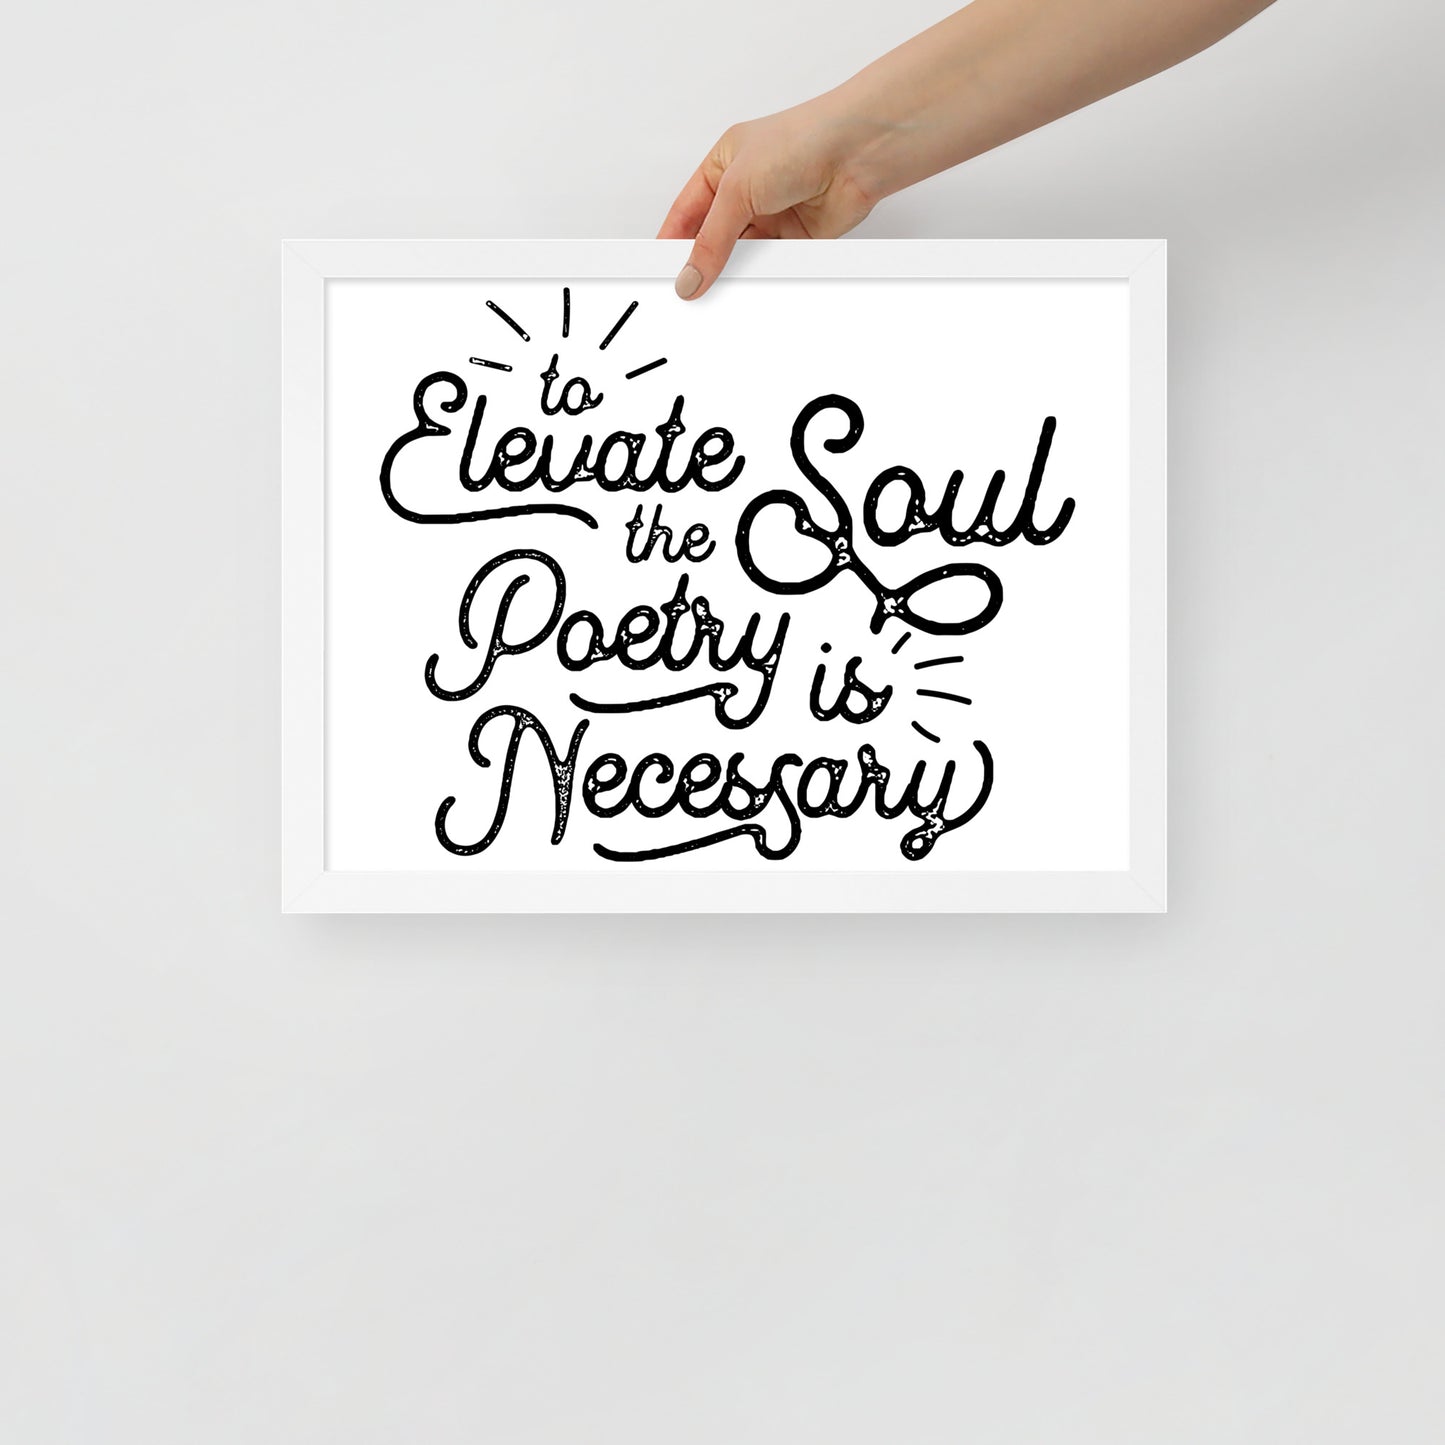 To Elevate the Soul Poetry is Necessary Framed Poster - 12 x 16 White Frame